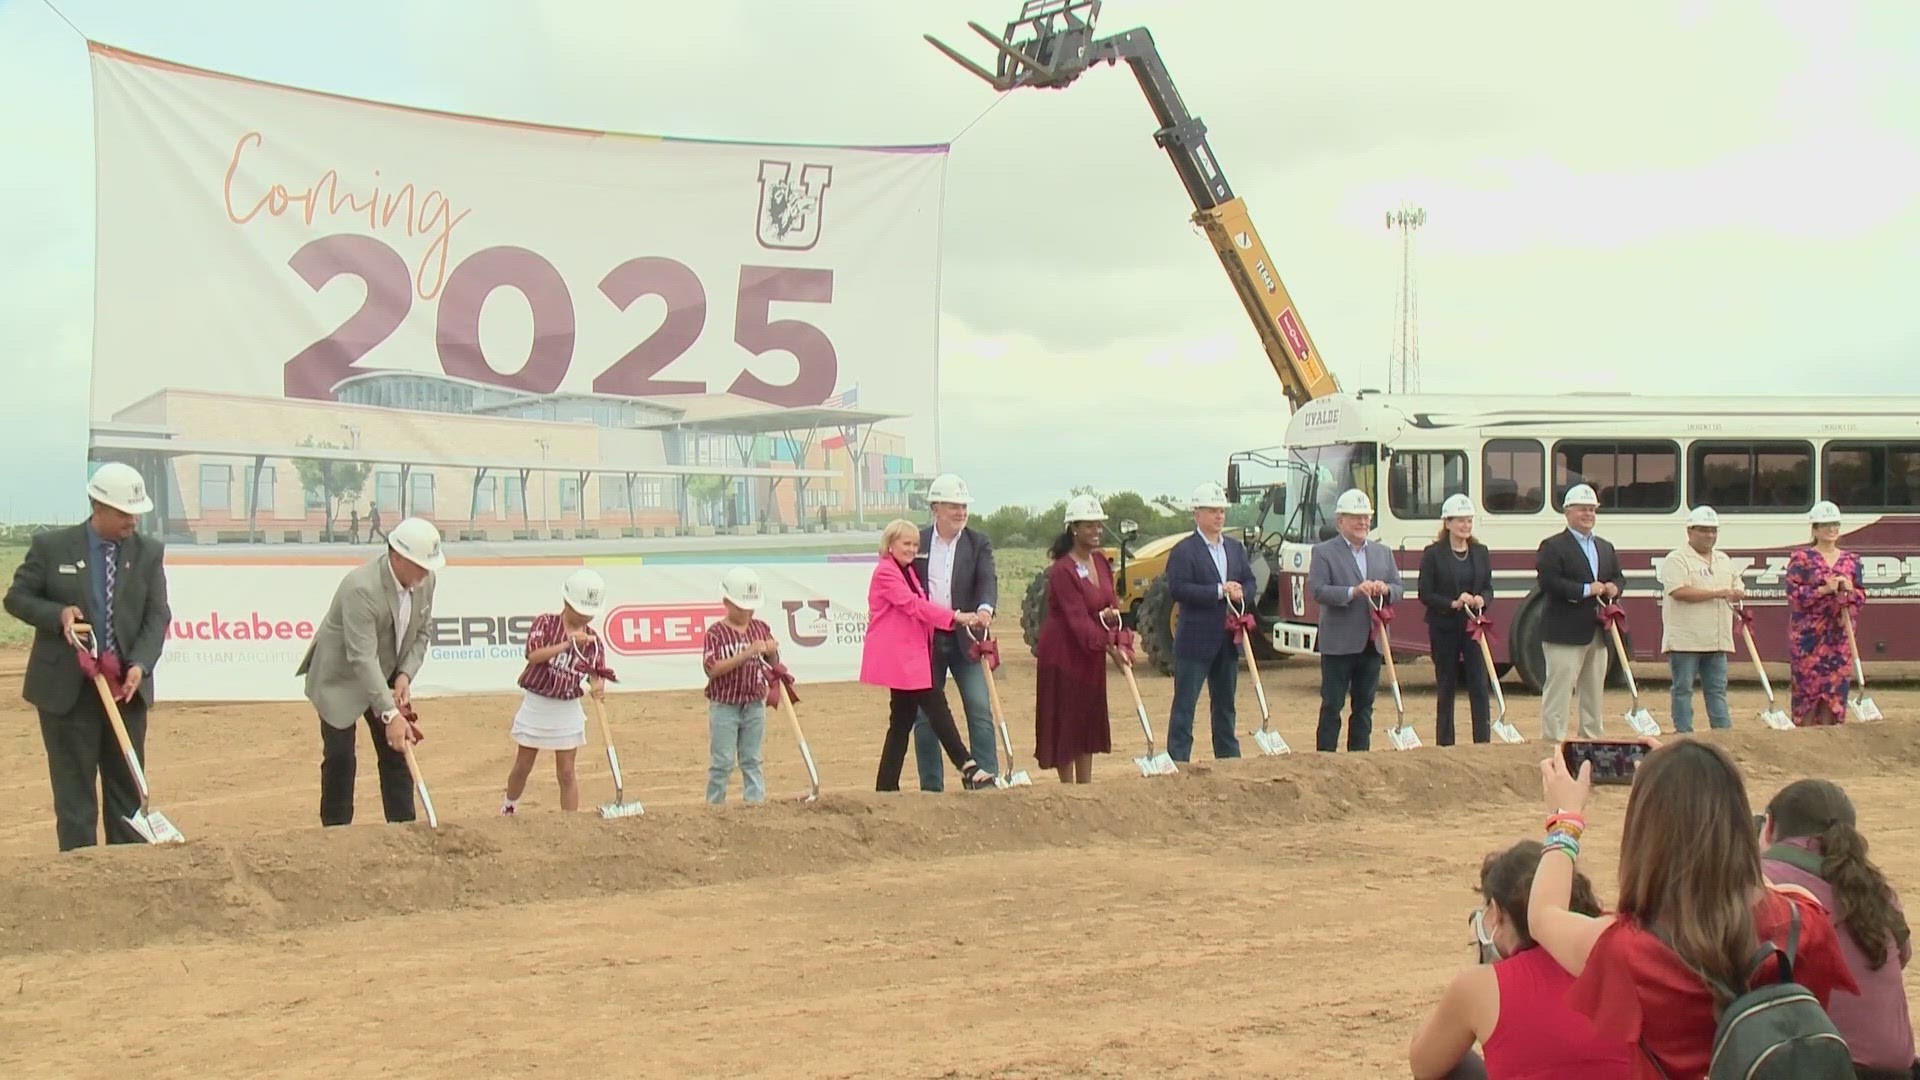 The Uvalde community broke ground in the school campus that will eventually replace Robb Elementary.